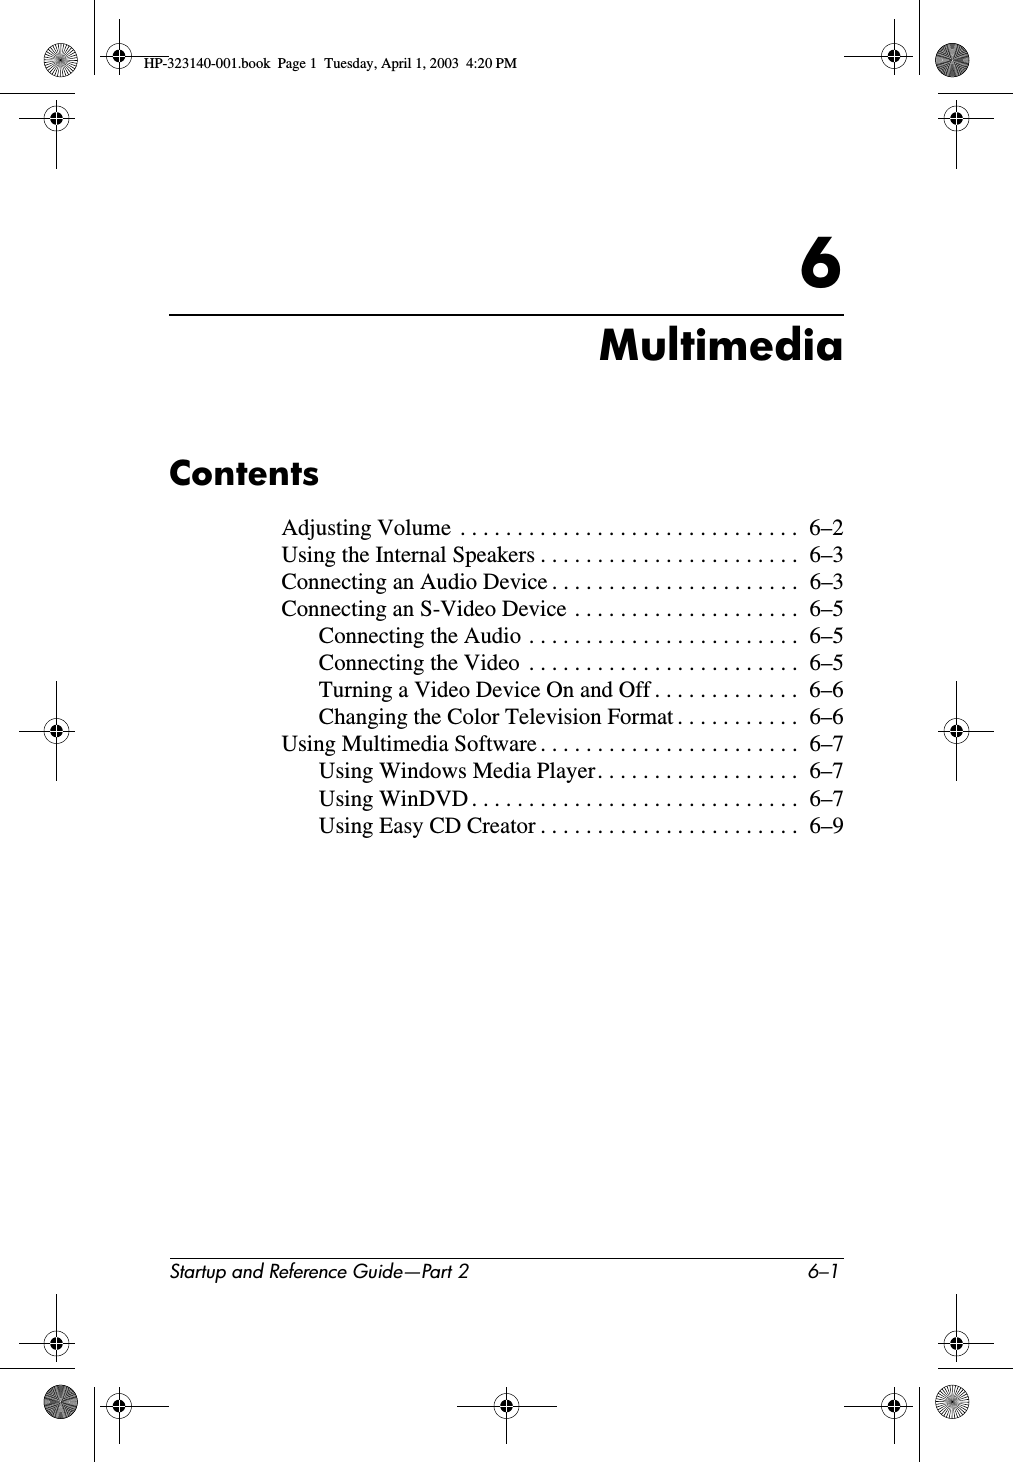 Startup and Reference Guide—Part 2 6–16MultimediaContentsAdjusting Volume  . . . . . . . . . . . . . . . . . . . . . . . . . . . . . .  6–2Using the Internal Speakers . . . . . . . . . . . . . . . . . . . . . . .  6–3Connecting an Audio Device . . . . . . . . . . . . . . . . . . . . . .  6–3Connecting an S-Video Device . . . . . . . . . . . . . . . . . . . .  6–5Connecting the Audio . . . . . . . . . . . . . . . . . . . . . . . .  6–5Connecting the Video  . . . . . . . . . . . . . . . . . . . . . . . .  6–5Turning a Video Device On and Off . . . . . . . . . . . . .  6–6Changing the Color Television Format . . . . . . . . . . .  6–6Using Multimedia Software . . . . . . . . . . . . . . . . . . . . . . .  6–7Using Windows Media Player. . . . . . . . . . . . . . . . . .  6–7Using WinDVD . . . . . . . . . . . . . . . . . . . . . . . . . . . . .  6–7Using Easy CD Creator . . . . . . . . . . . . . . . . . . . . . . .  6–9HP-323140-001.book  Page 1  Tuesday, April 1, 2003  4:20 PM